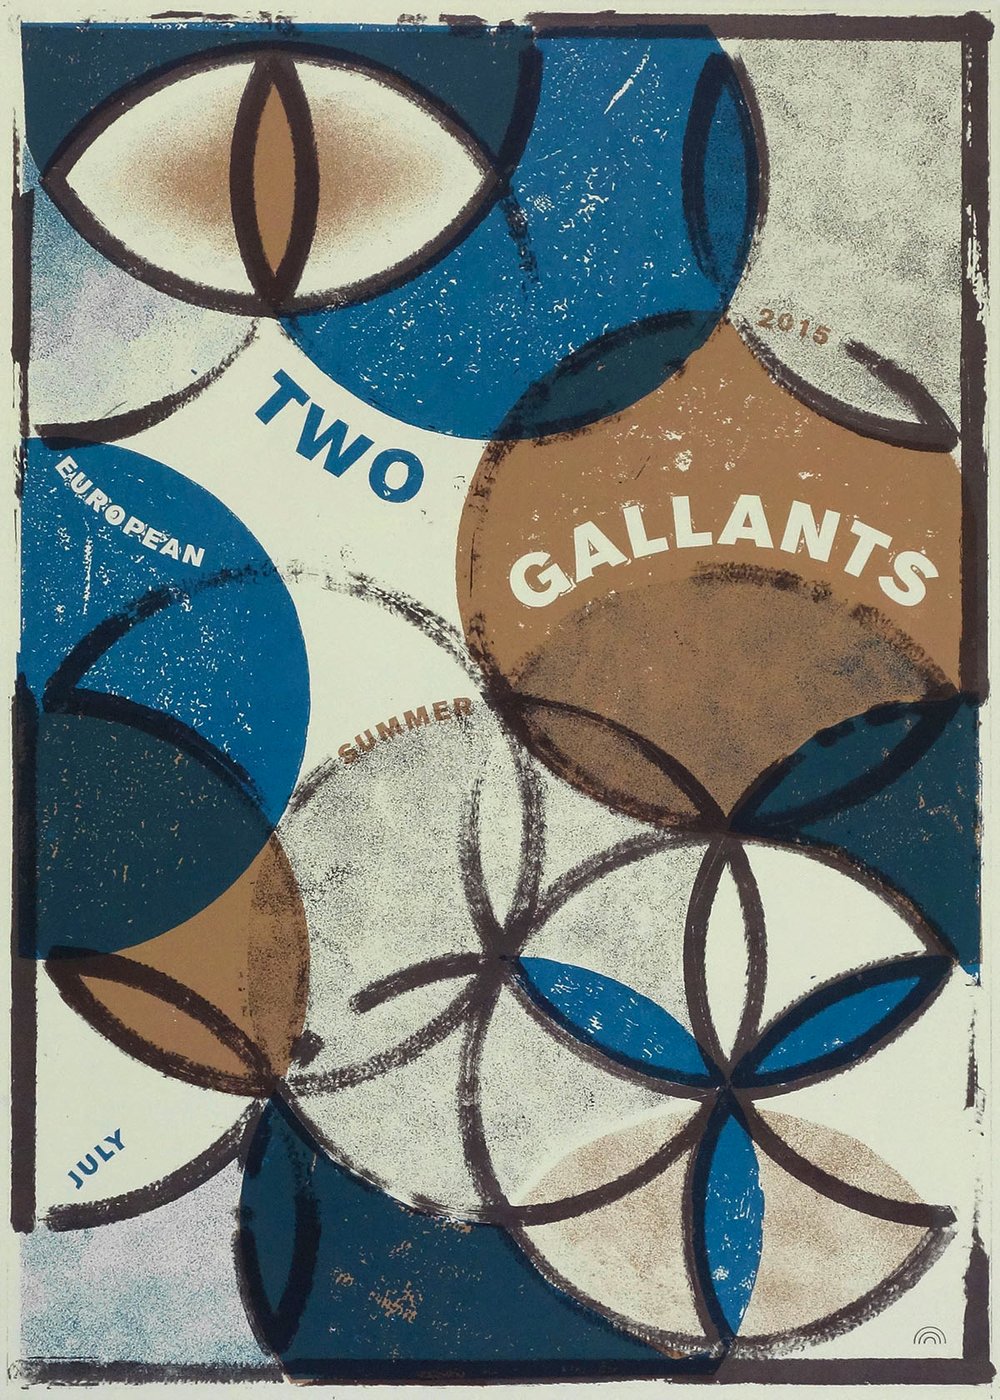 Image of TWO GALLANTS